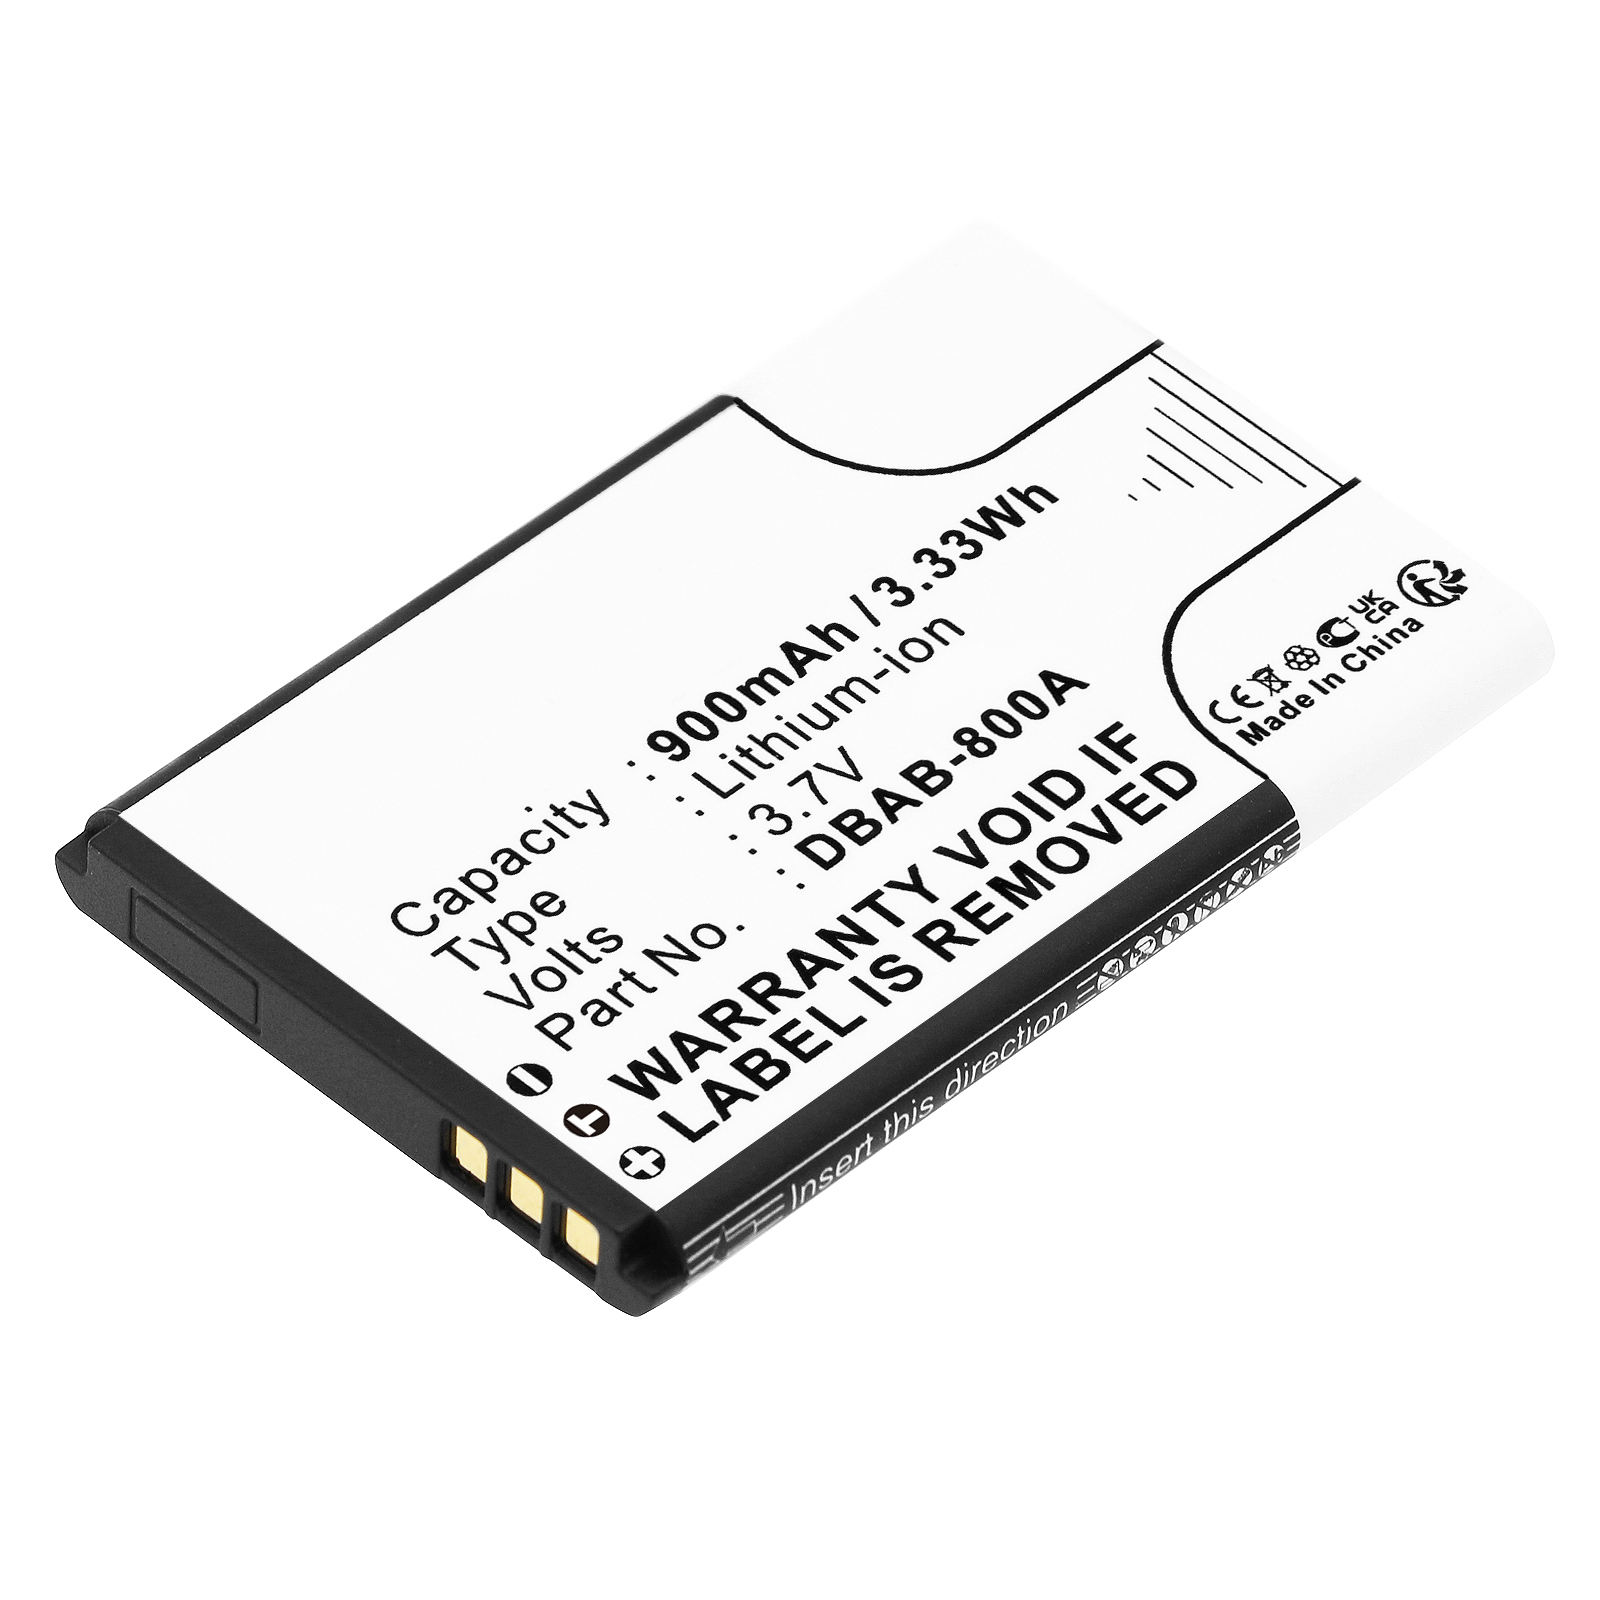 Synergy Digital Cell Phone Battery, Compatible with Doro DBAB-800A Cell Phone Battery (Li-ion, 3.7V, 900mAh)